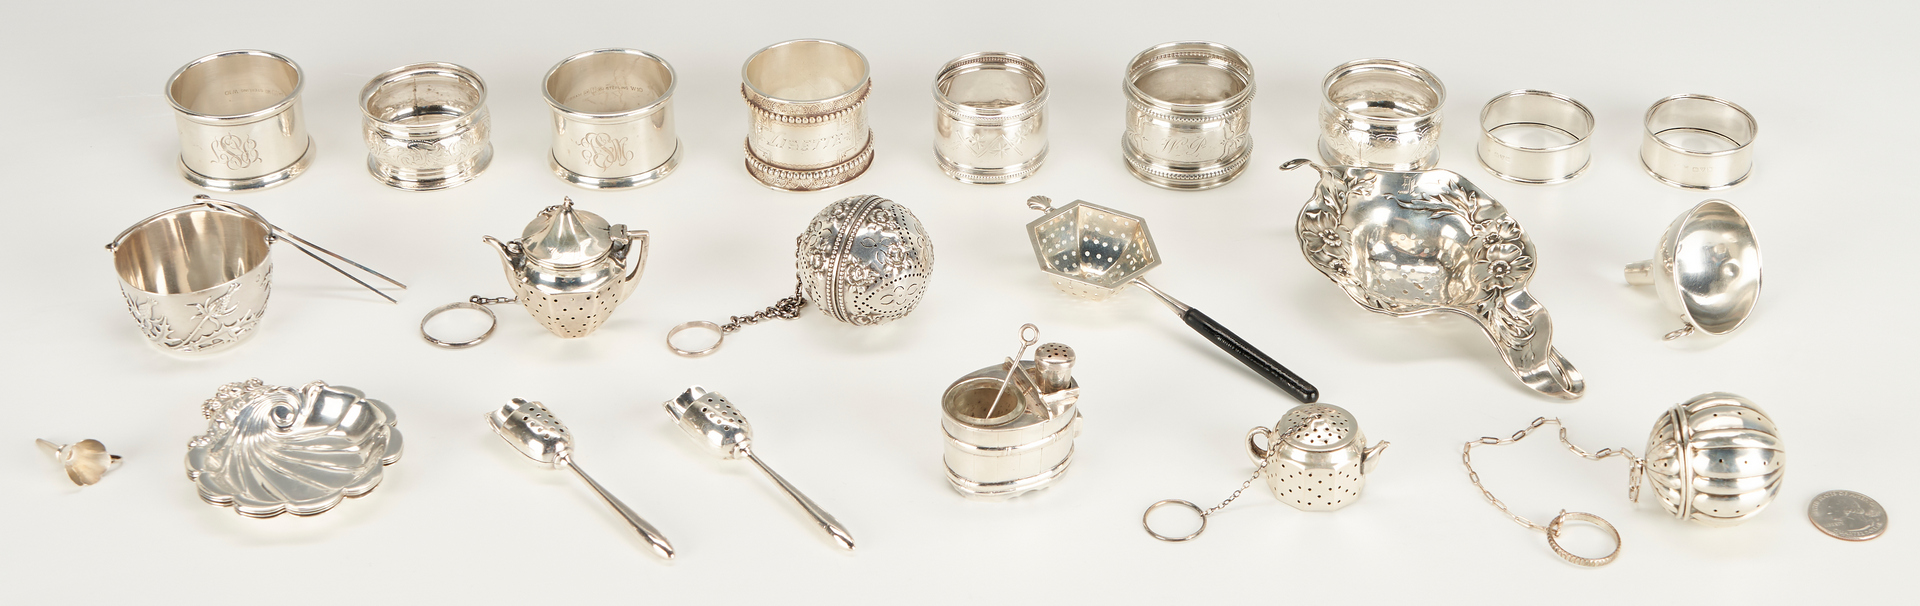 Lot 1251: 25 Asst. Sterling Silver Items, incl. Tea Strainers & Napkin Rings